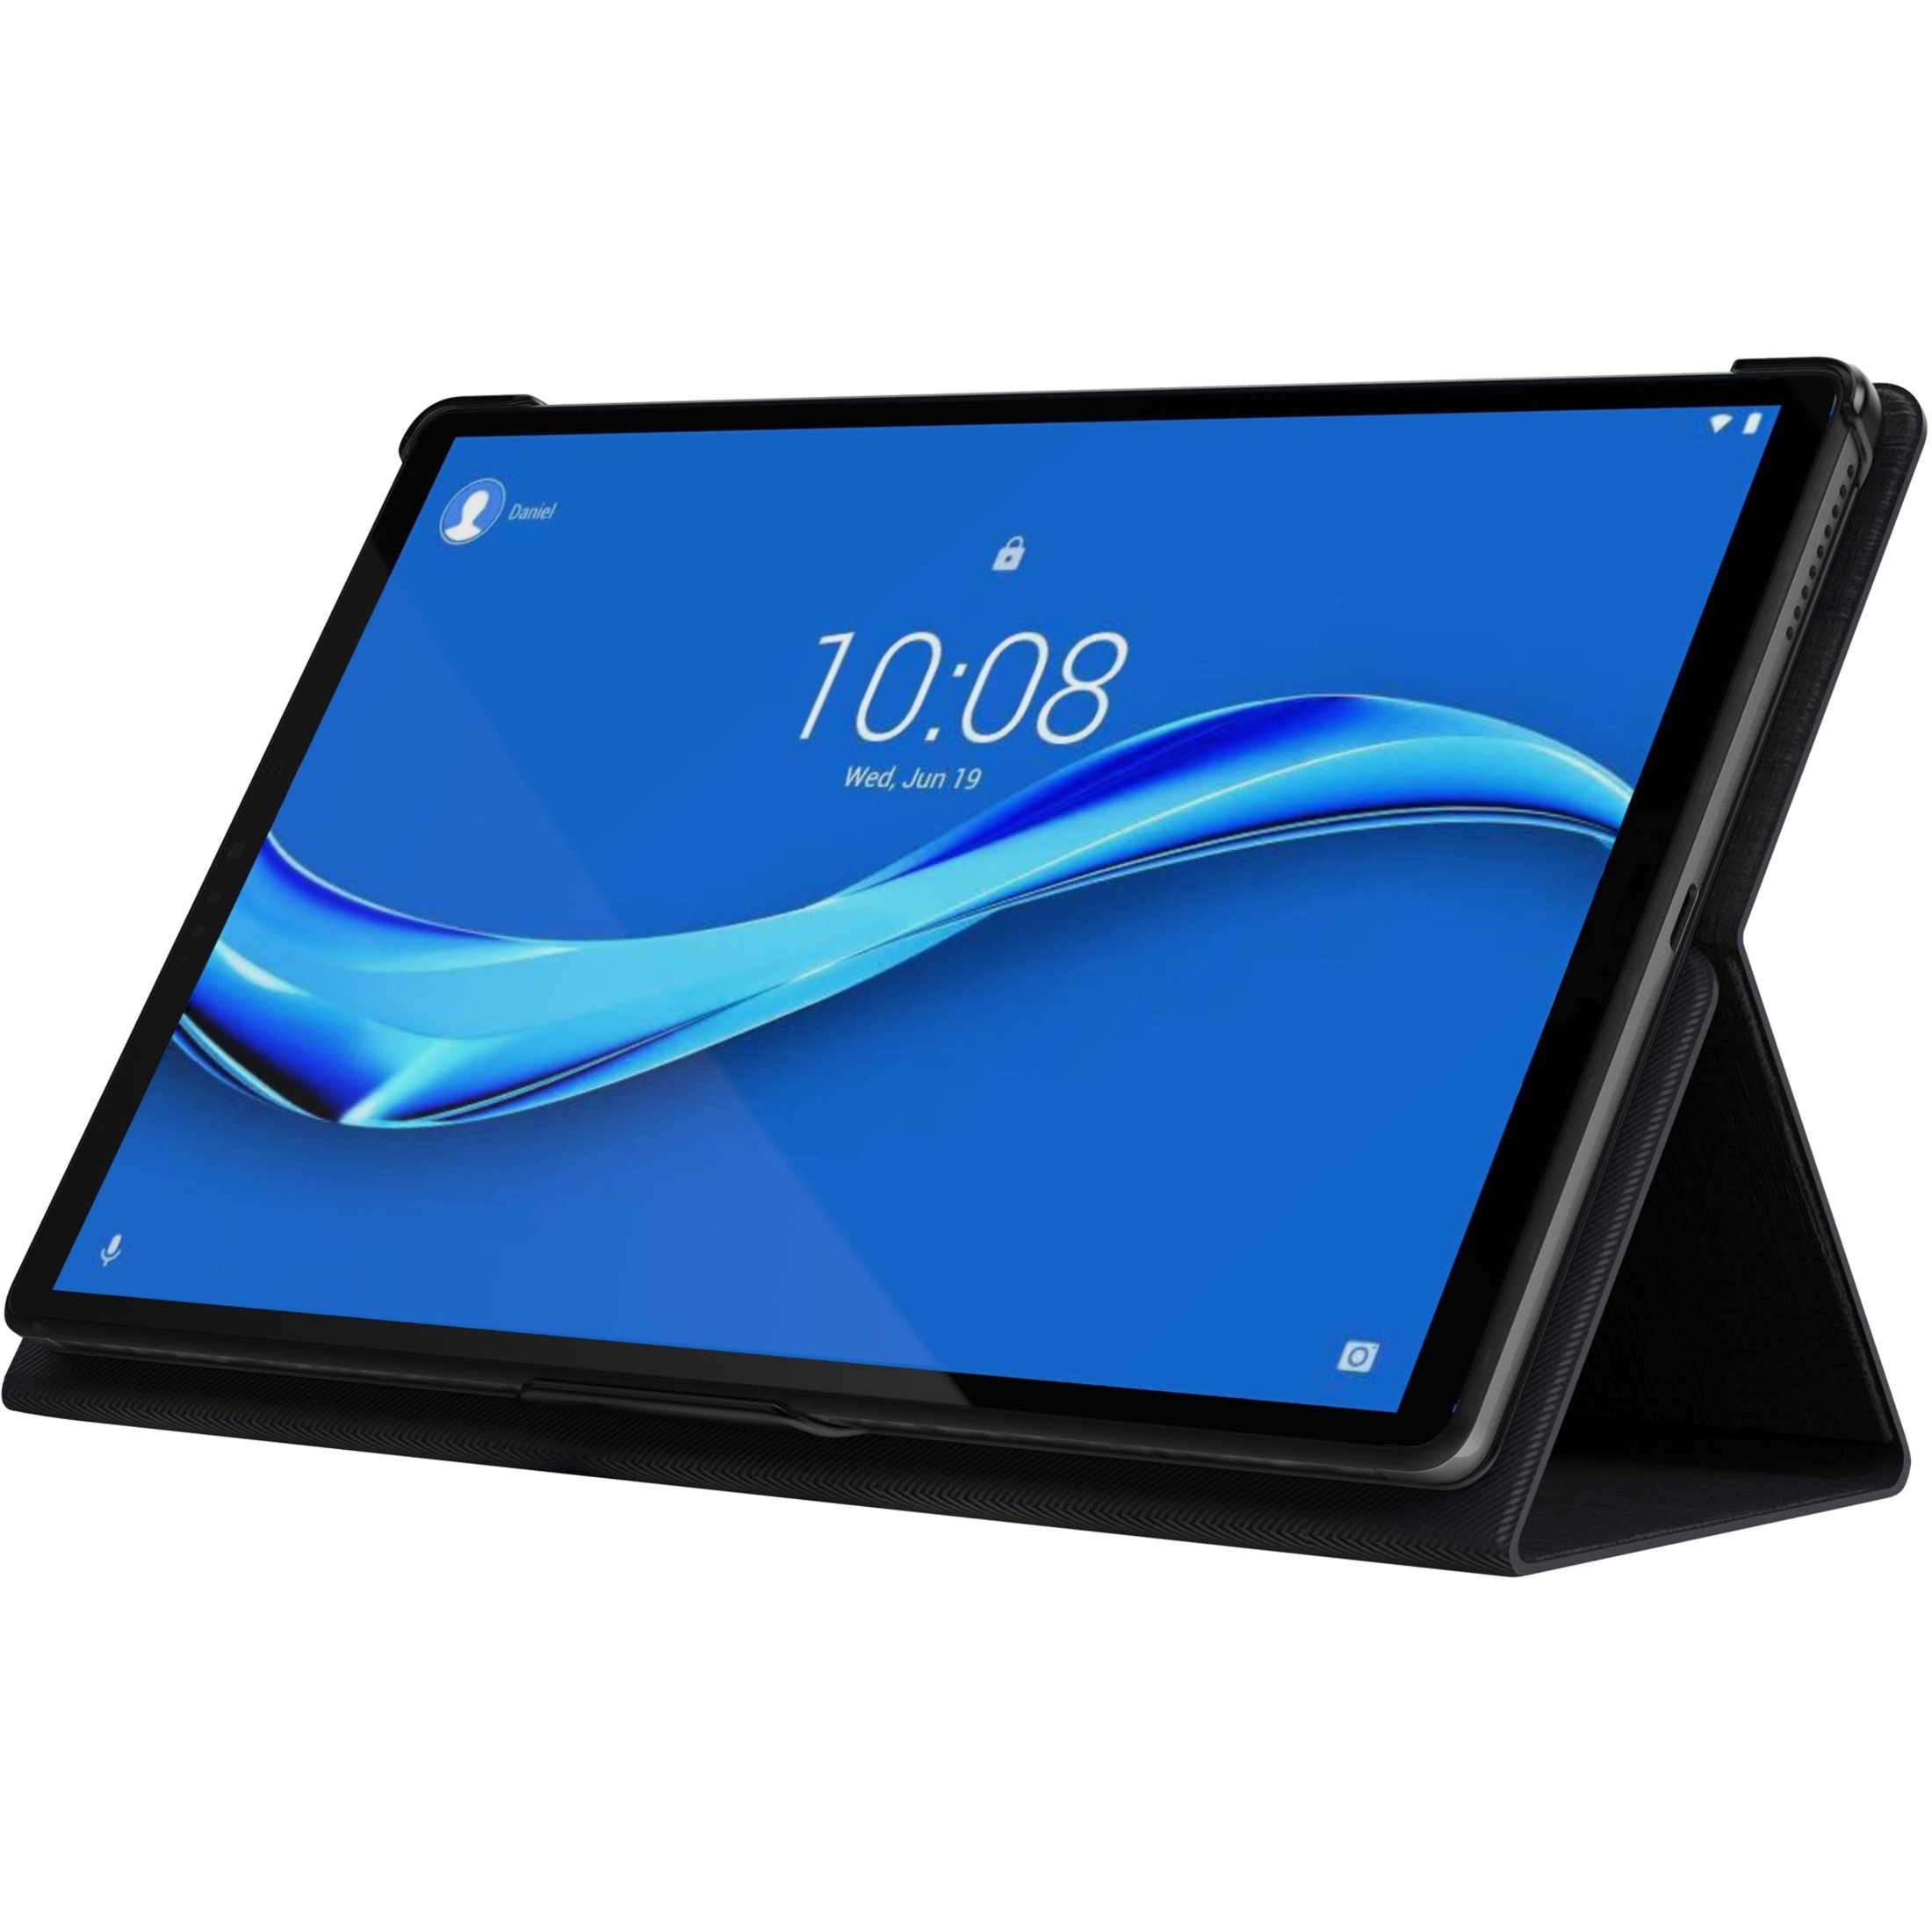 Lenovo Tab M10 10.3" Tablet - MediaTek Helio P22T - 4GB - 64GB FHD Plus with the Smart Charging Station - Android 9.0 (Pie) - image 6 of 33